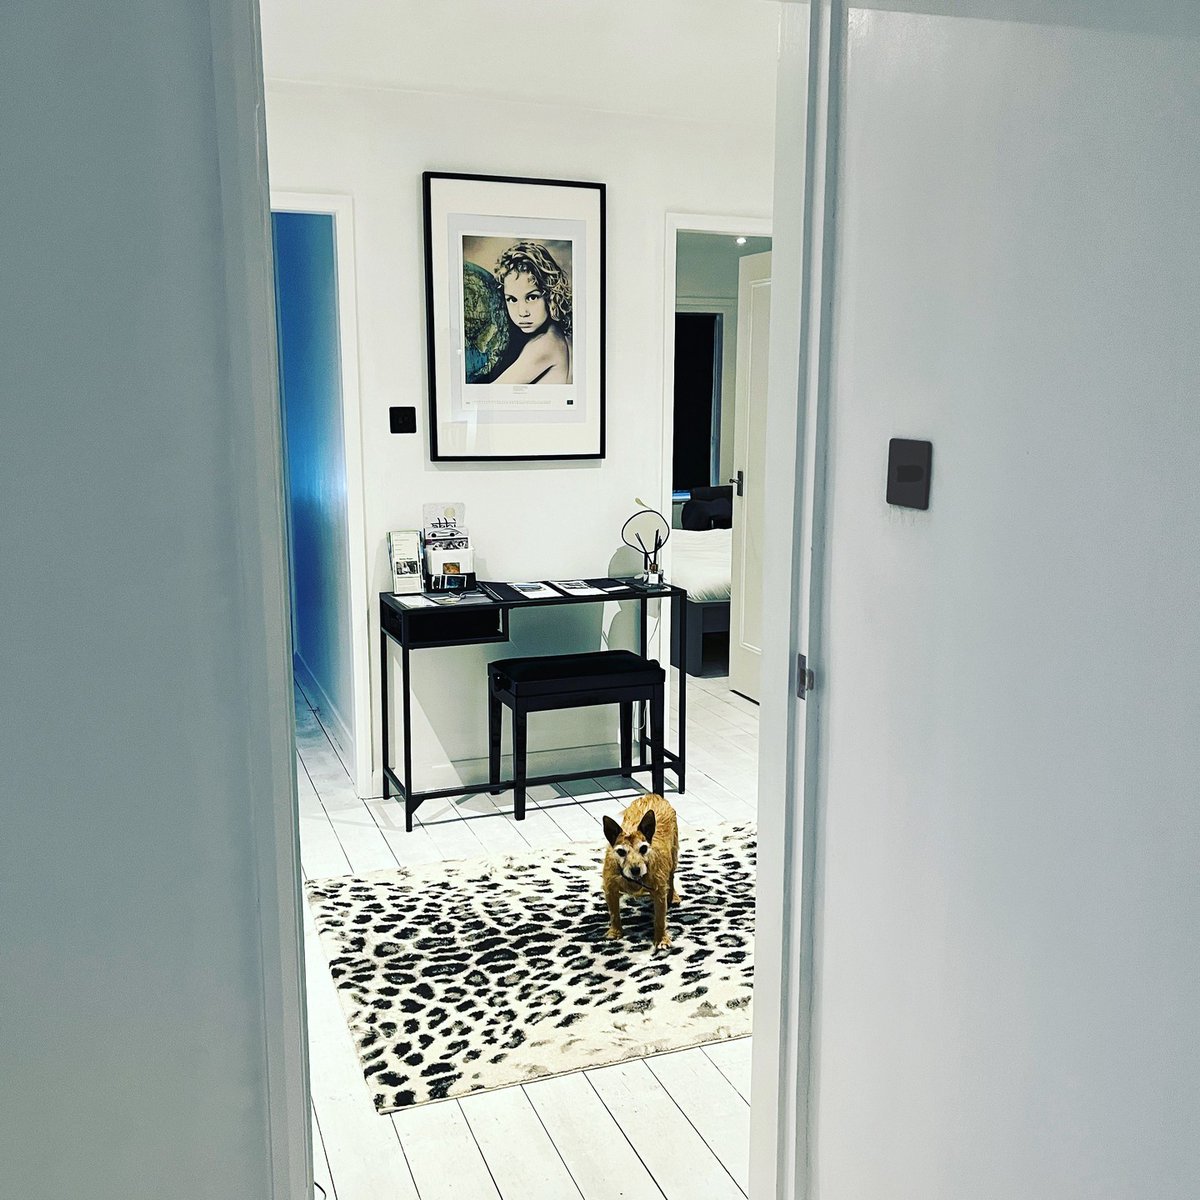 A glimpse of our entrance hall at Cragg View with a guest appearance by Ruby! 🇬🇧 And another award-winning artwork on the wall too! Book our lovely detached property on Vrbo and Airbnb in Grange-over-Sands here: linktr.ee/craggview #grangeoversands #dogfriendly #vrbo #airbnb